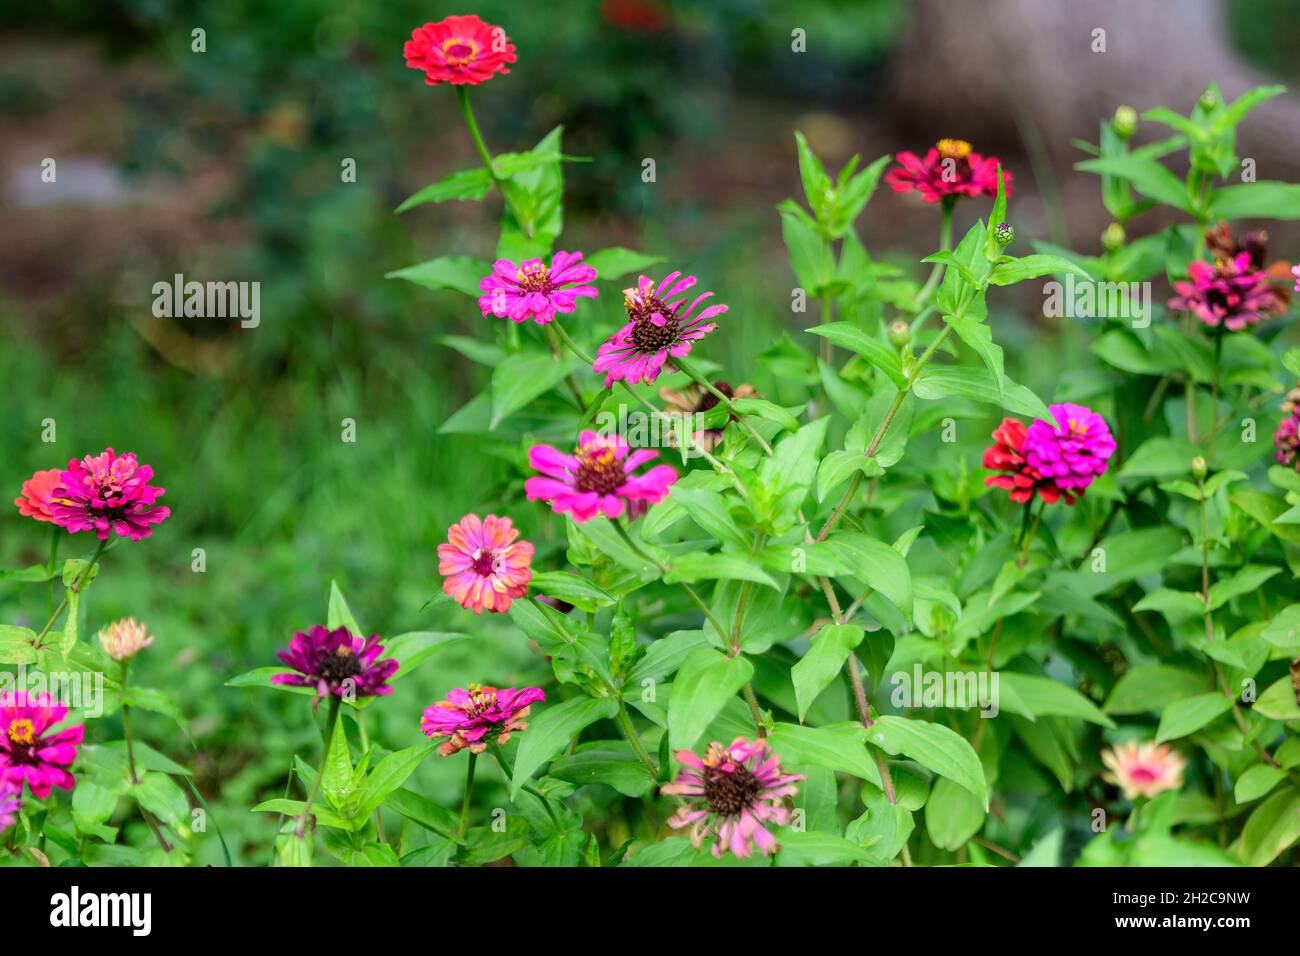 Close up of many beautiful large pink magenta zinnia flowers in full bloom on blurred green background, photographed with soft focus in a garden in a Stock Photo